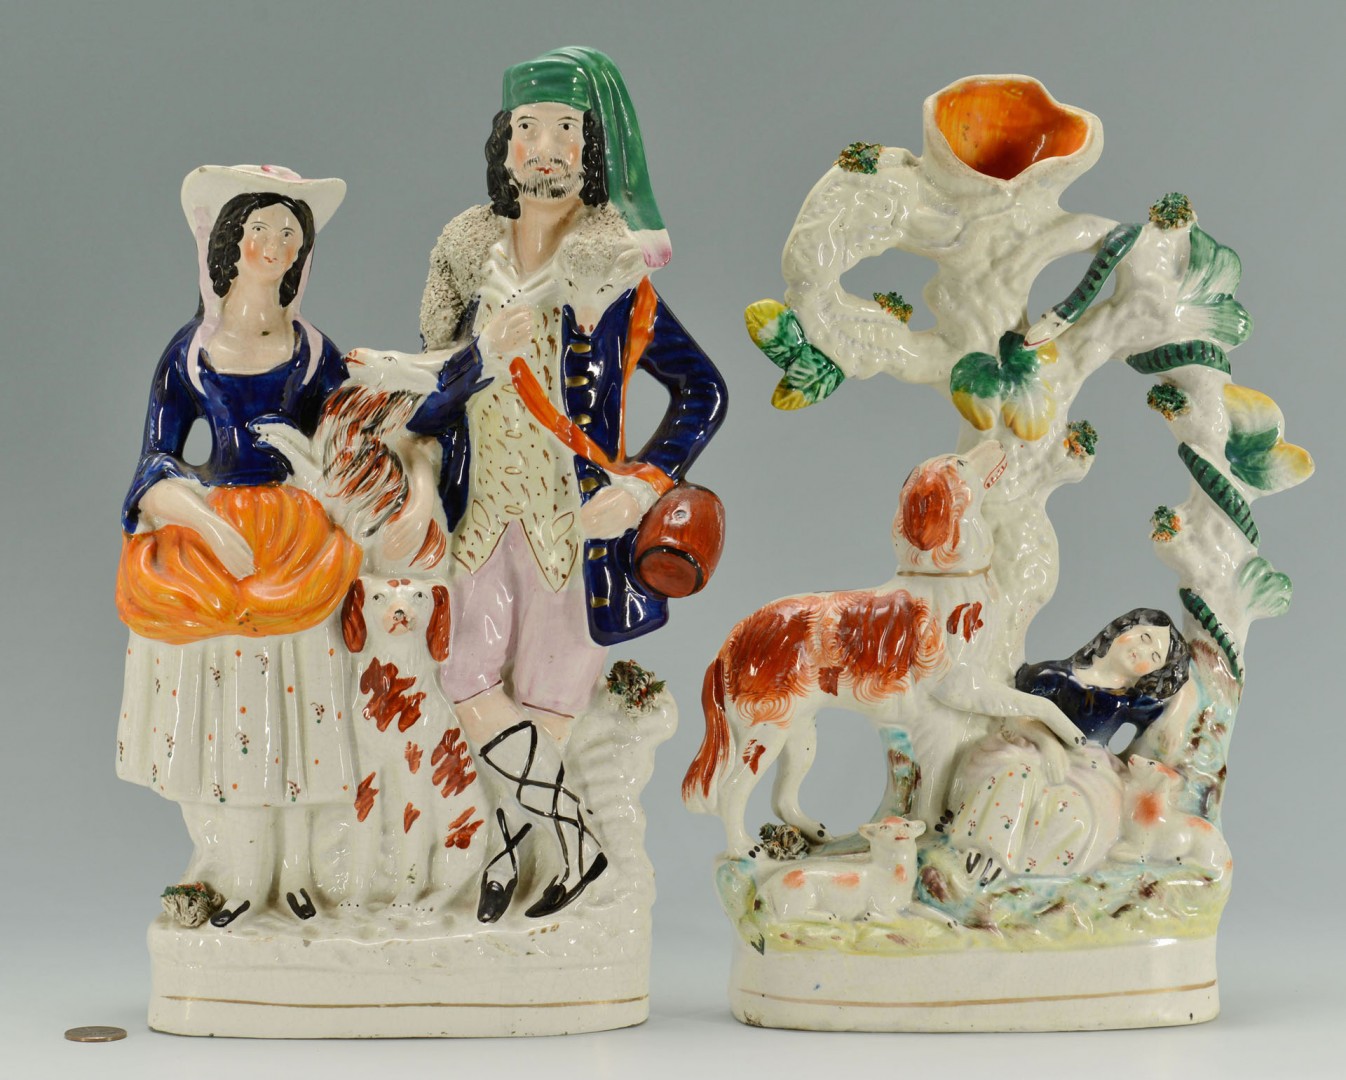 Lot 277: 2 Staffordshire Figural Groups, people and animals